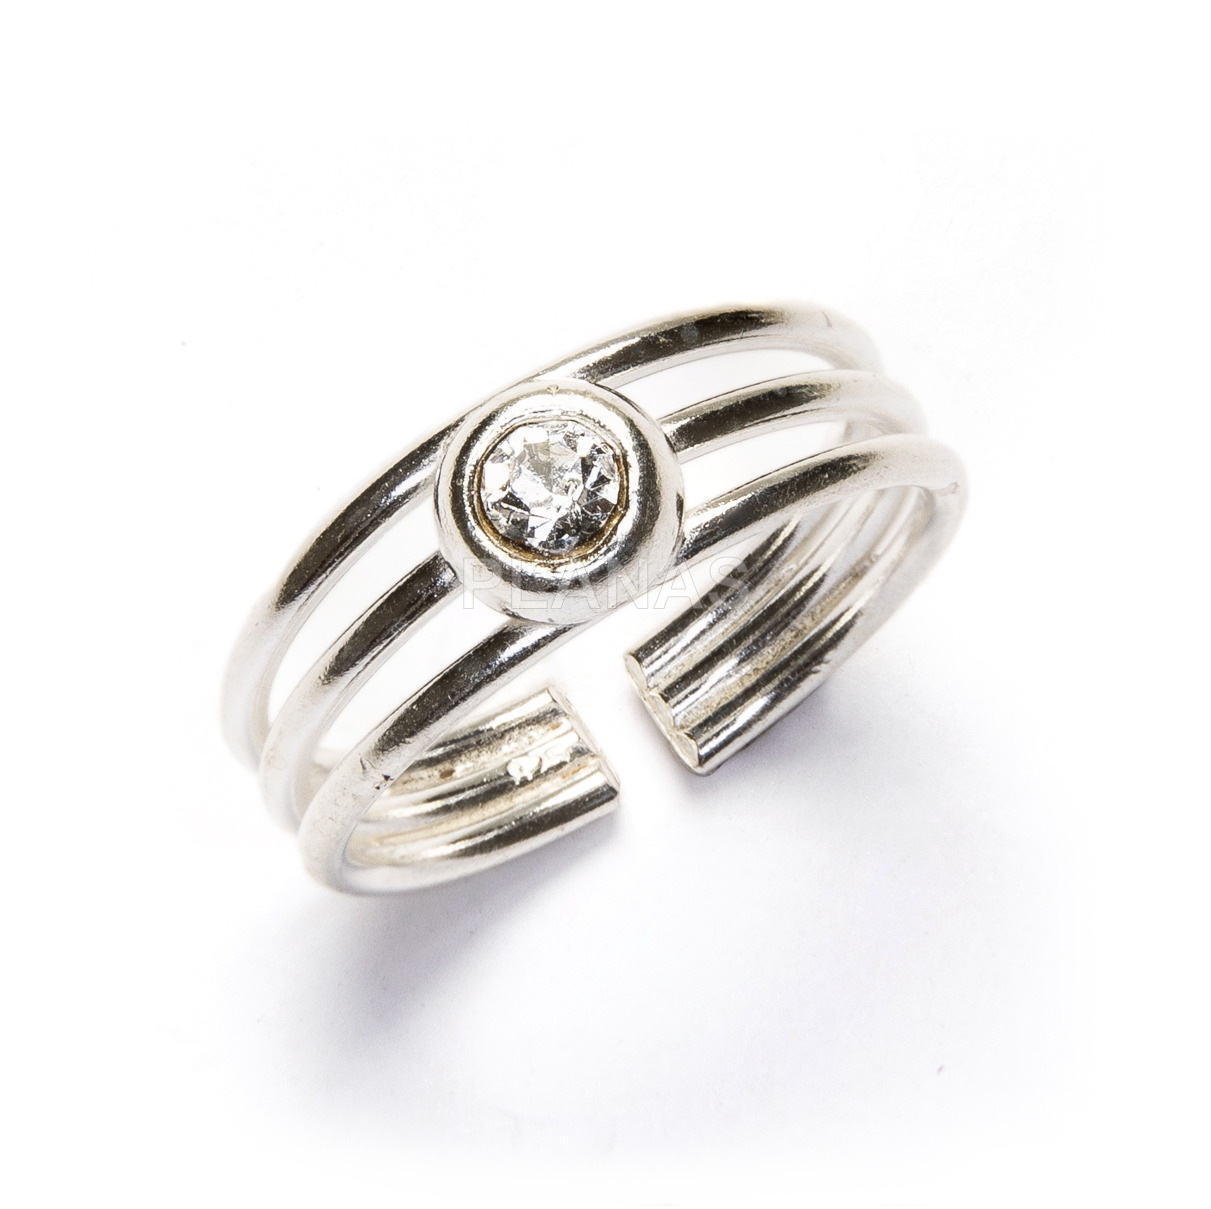 Adjustable ring in sterling silver and white zirconia.